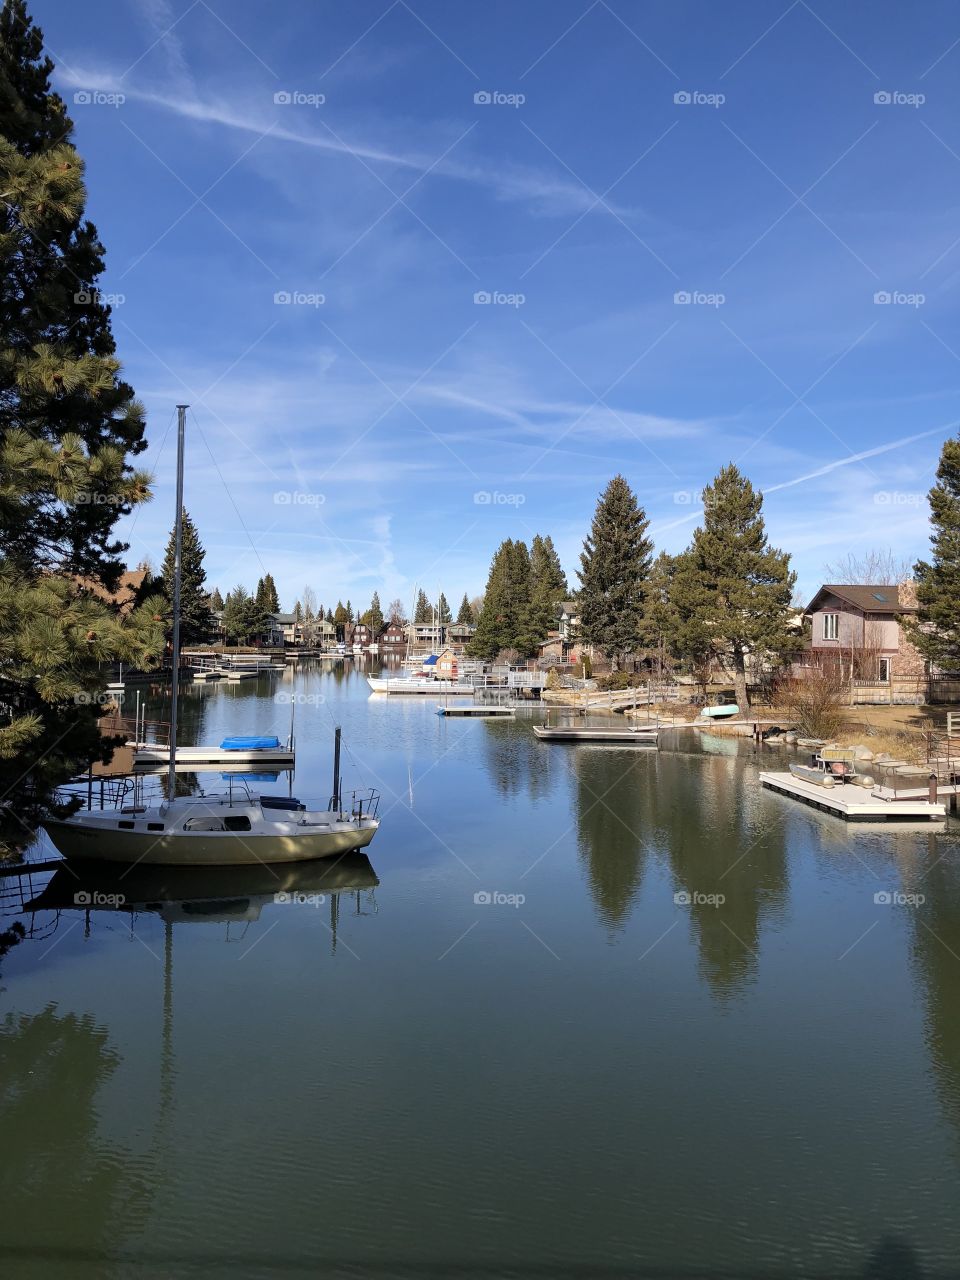 Lake Tahoe Water channels with beautiful houses